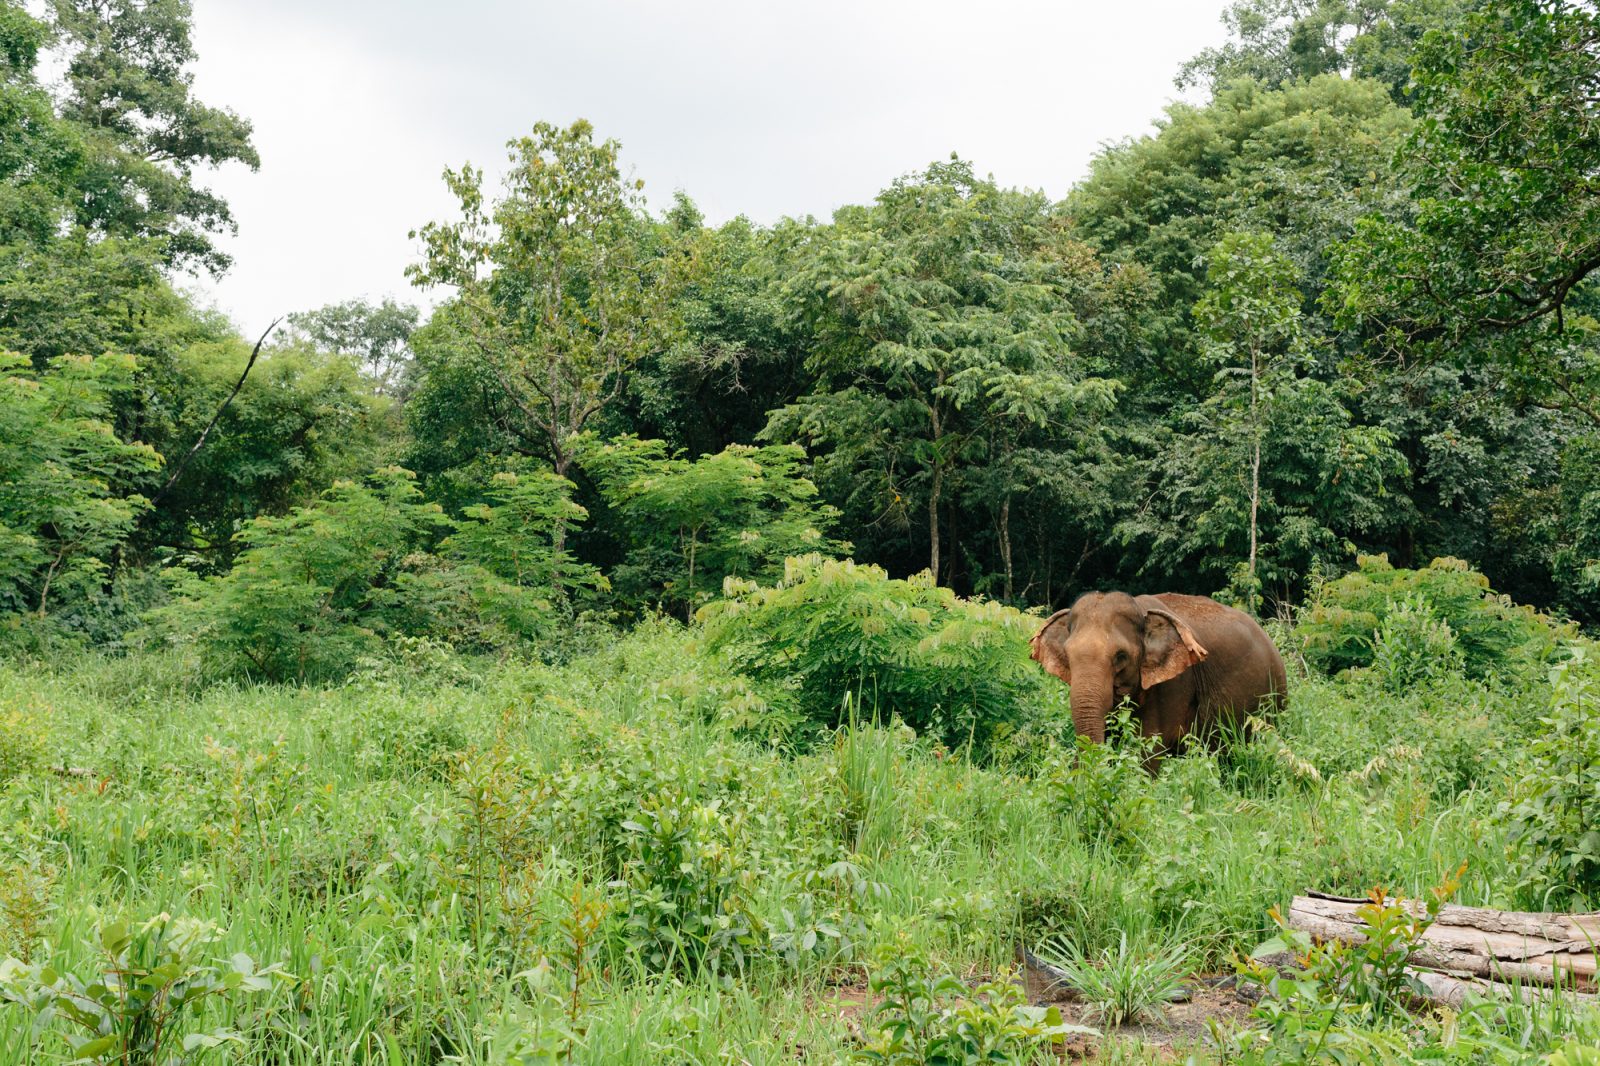 How to Recognize Ethical Wildlife Experience in South East Asia